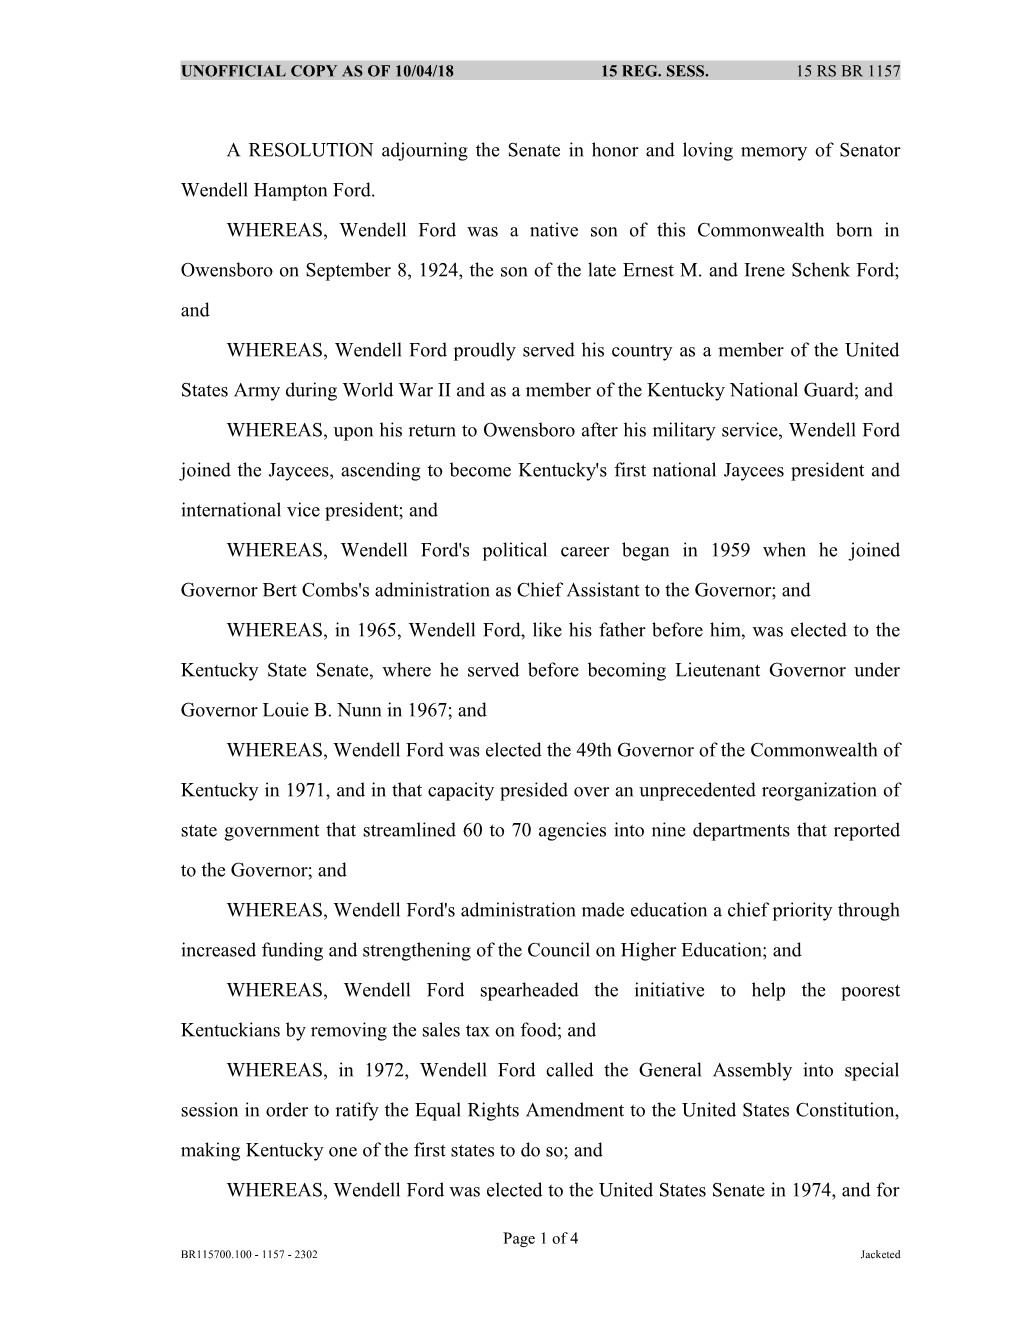 A RESOLUTION Adjourning the Senate in Honor and Loving Memory of Senator Wendell Hampton Ford